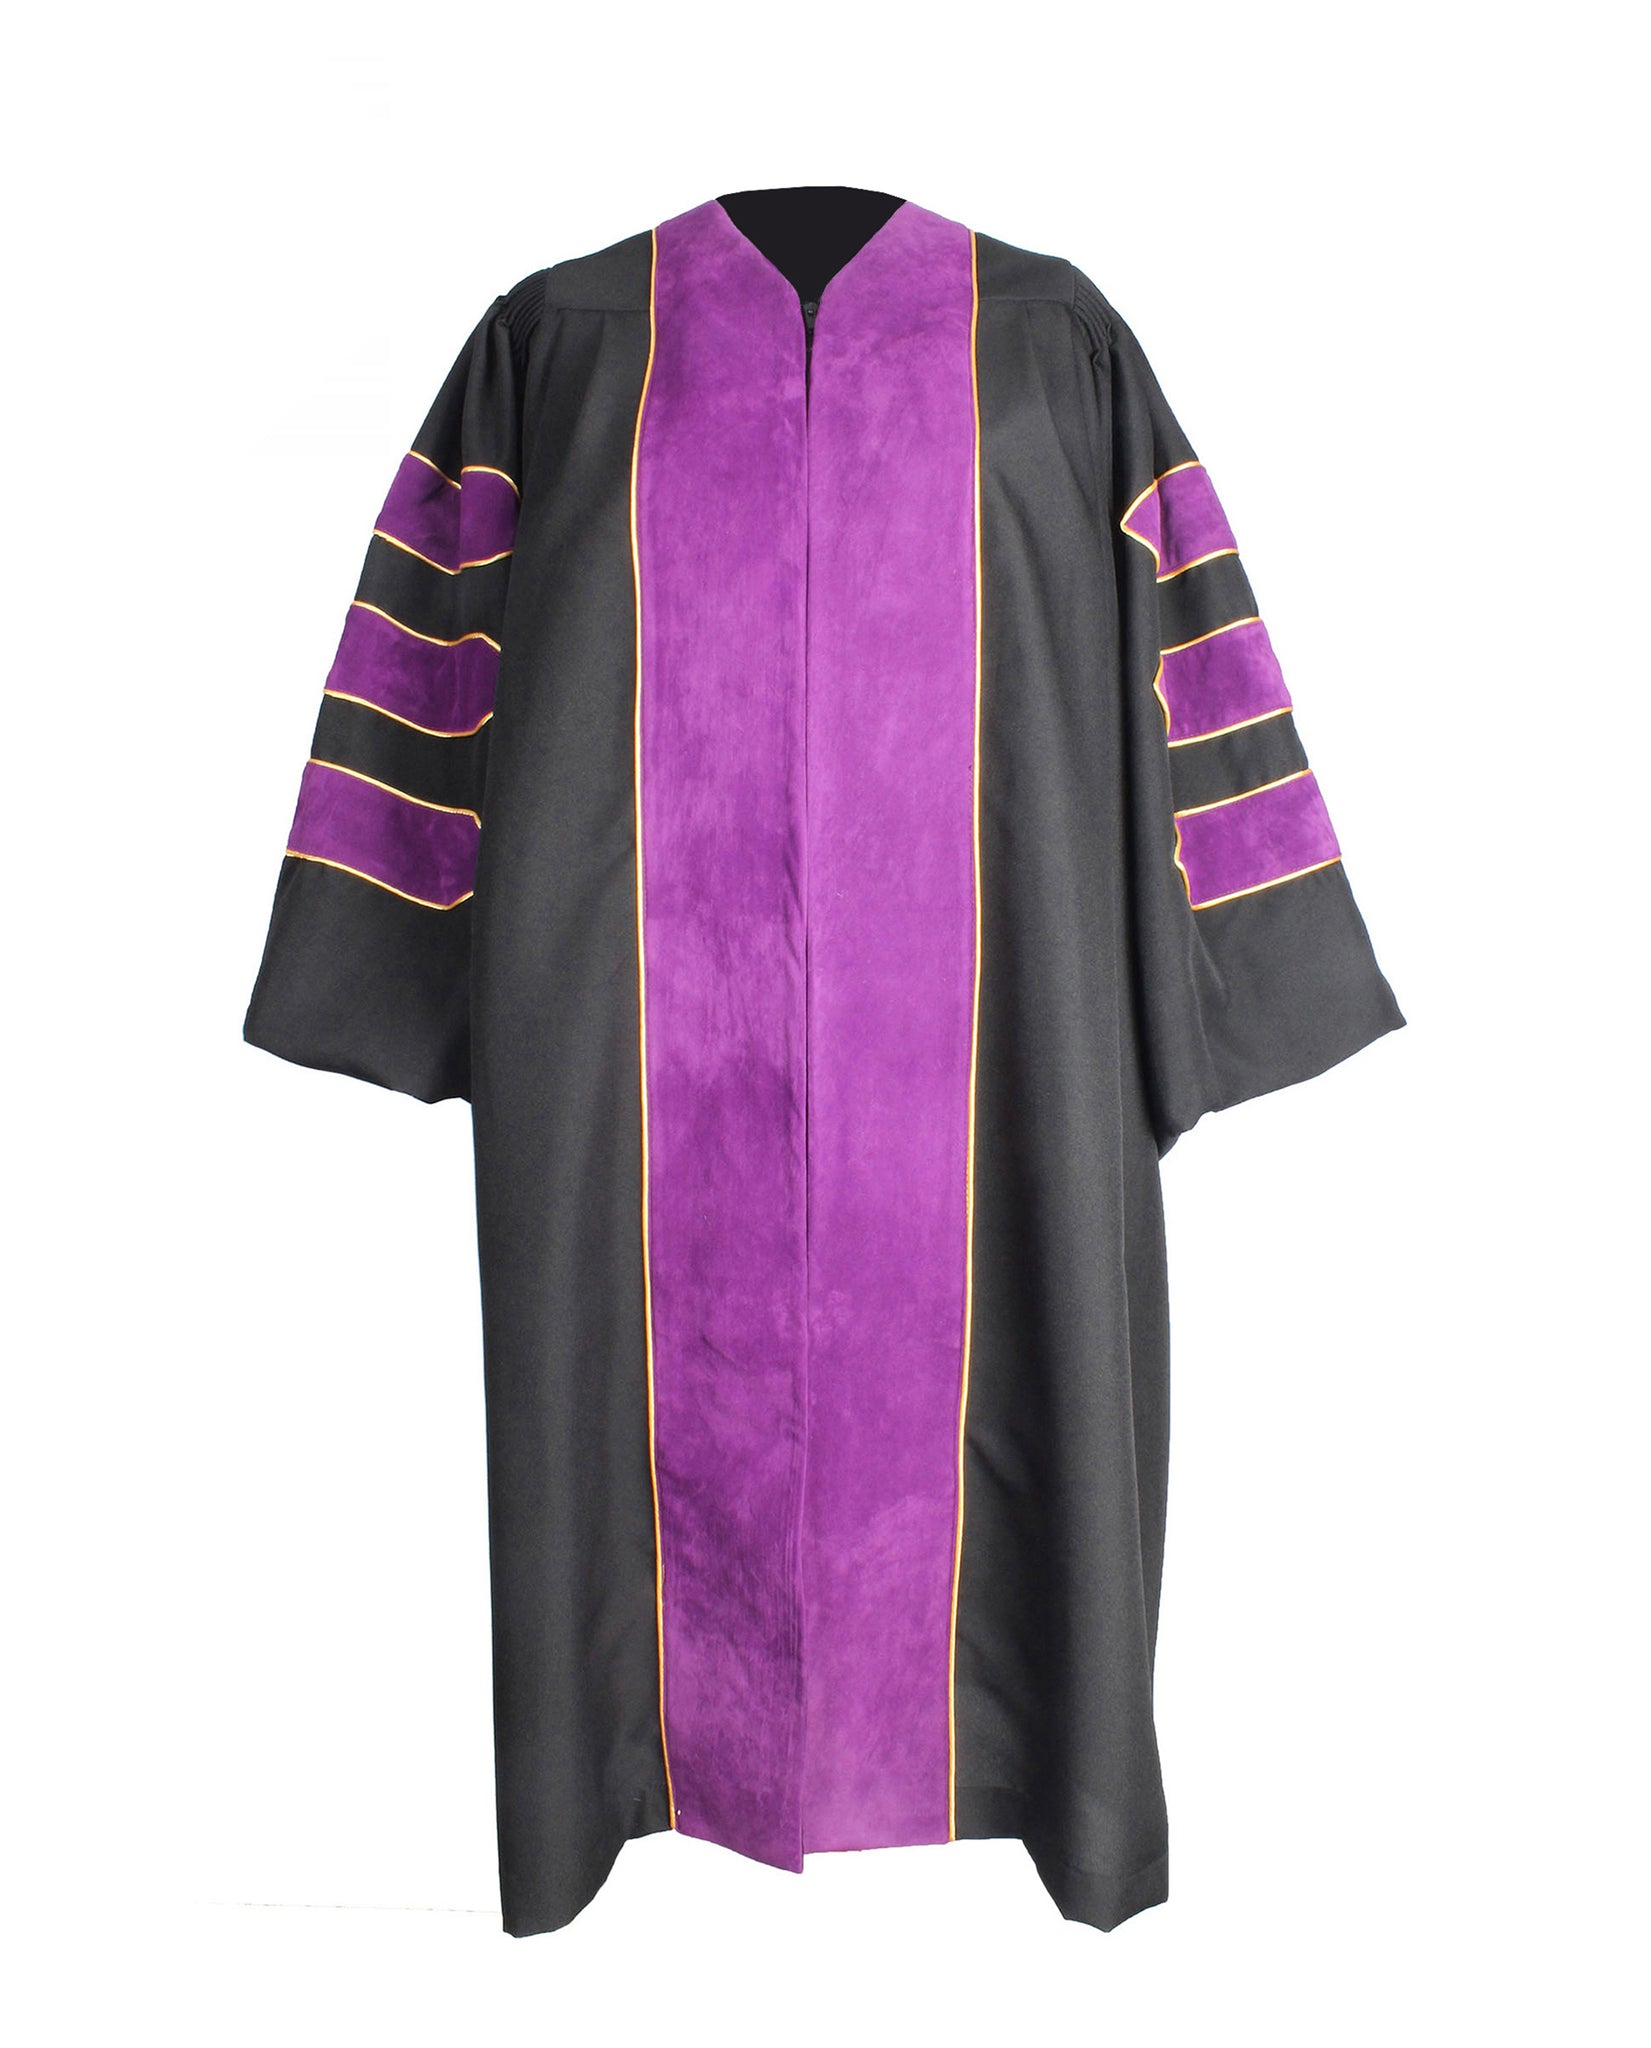 Deluxe Doctoral Graduation Gown|Graduation Regalia|PHD Gown with Gold Piping (Purple Velvet)